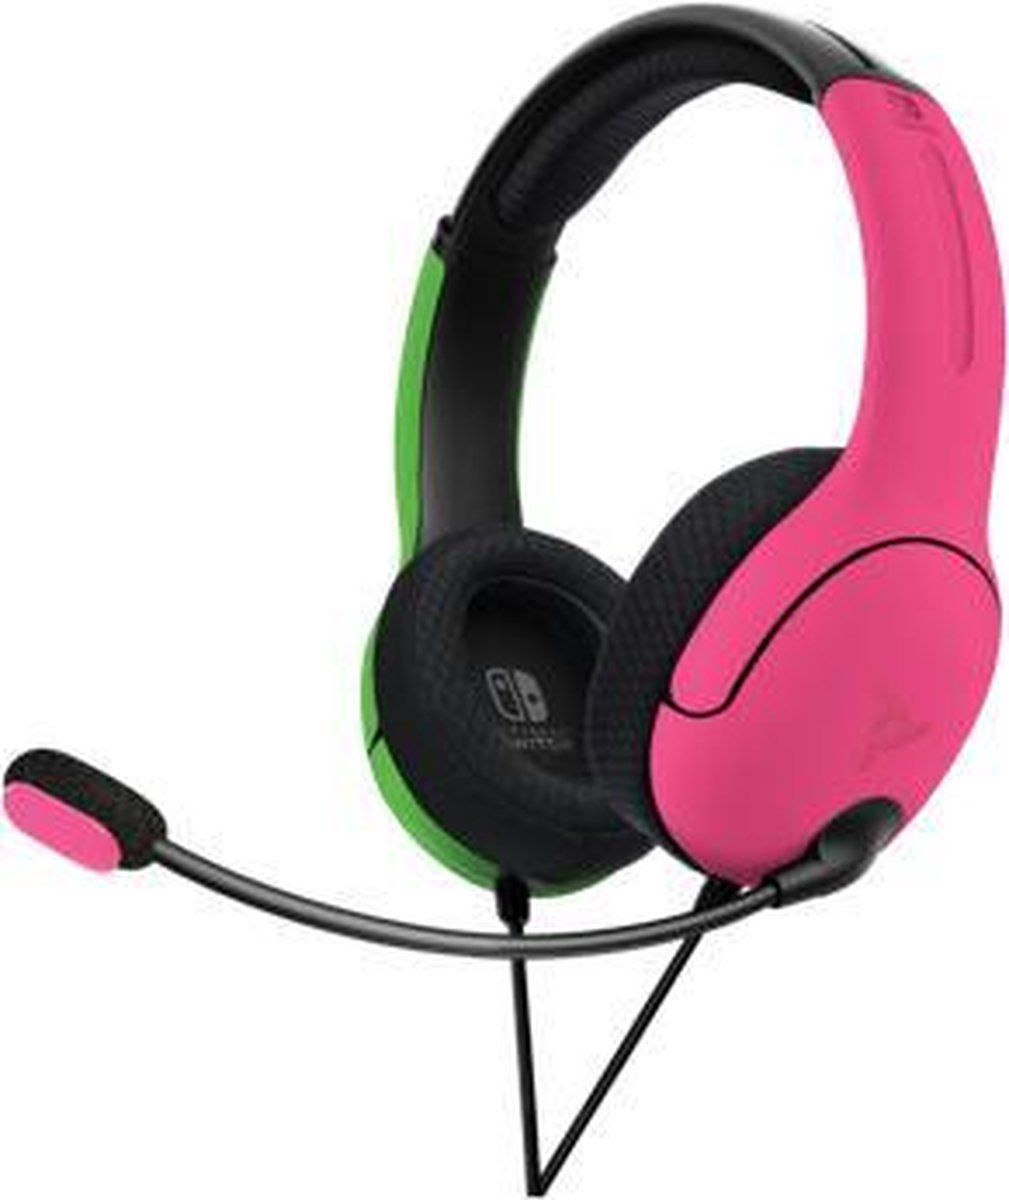 pdp-lvl40-gaming-headset-stereo-nintendo-switch-rozegroen